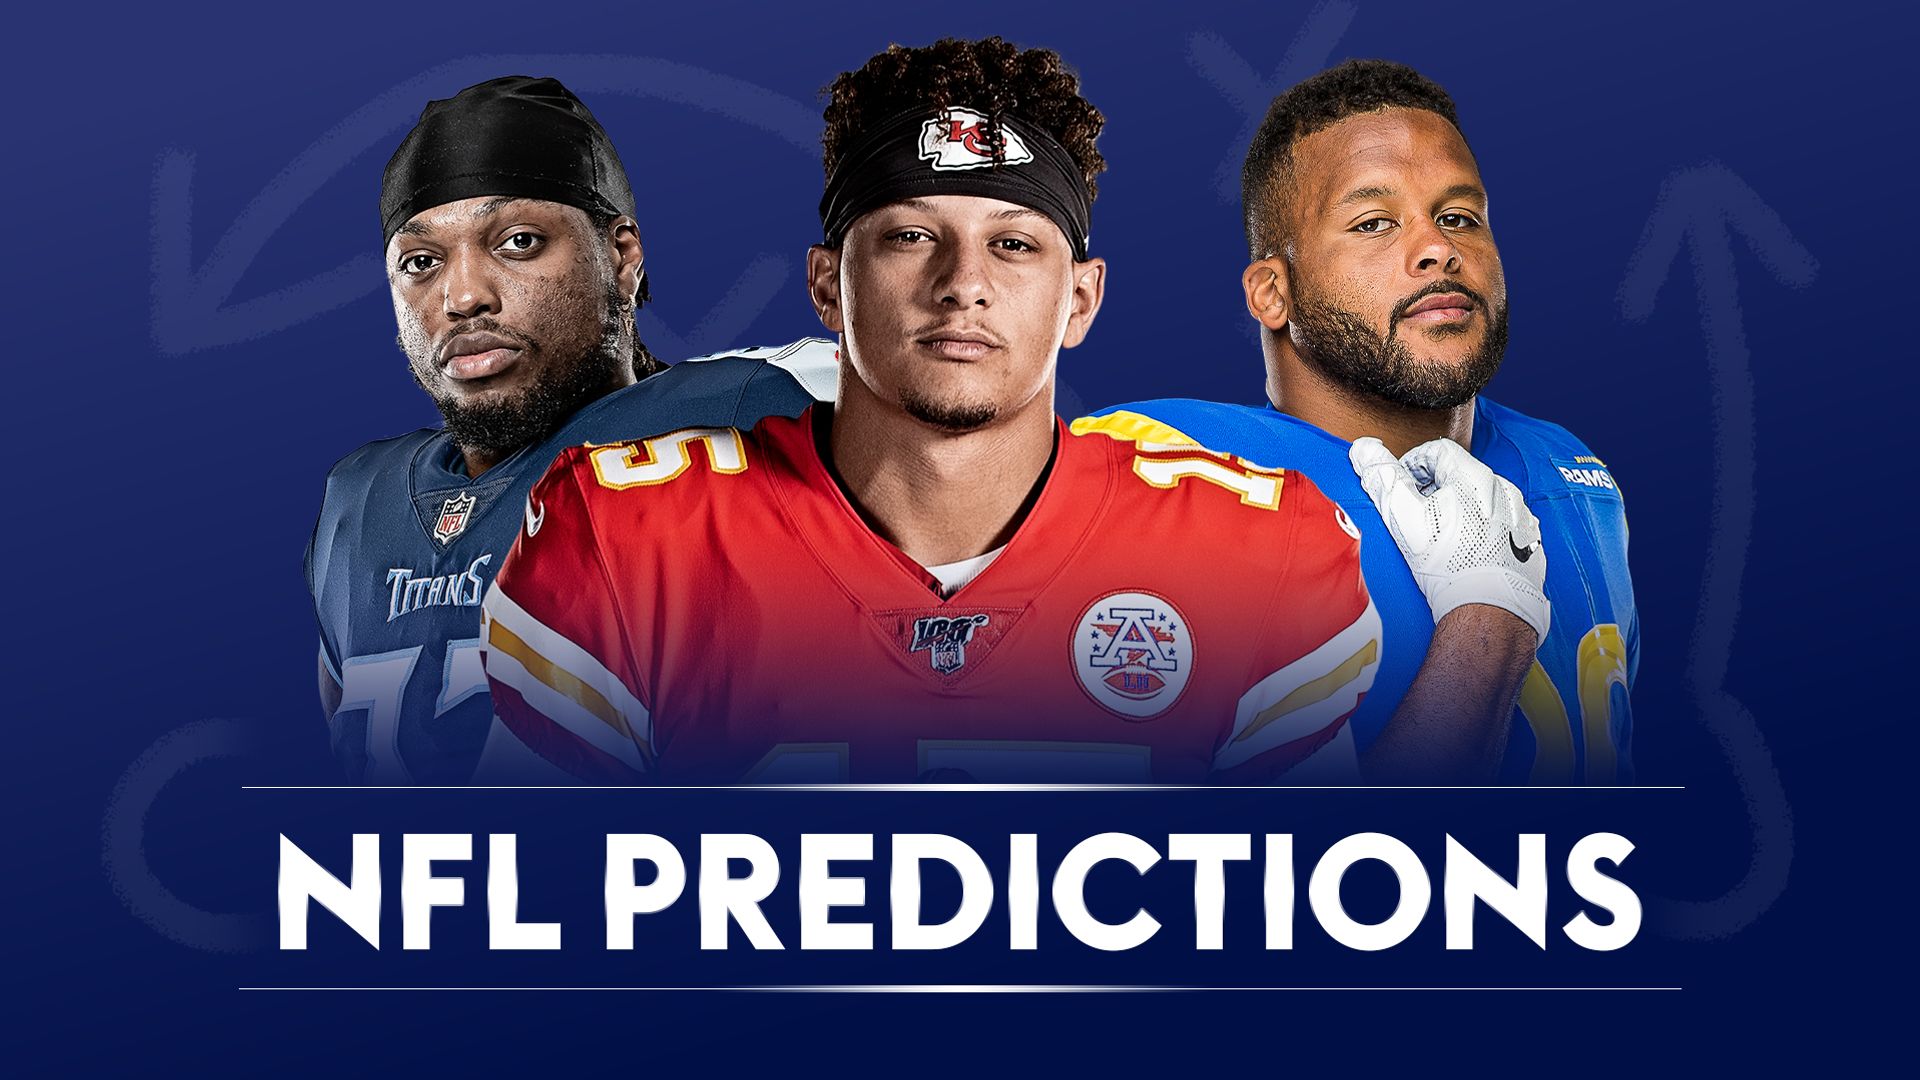 NFL Predictions | ‘Chiefs have the sting over Chargers’SkySports | Information